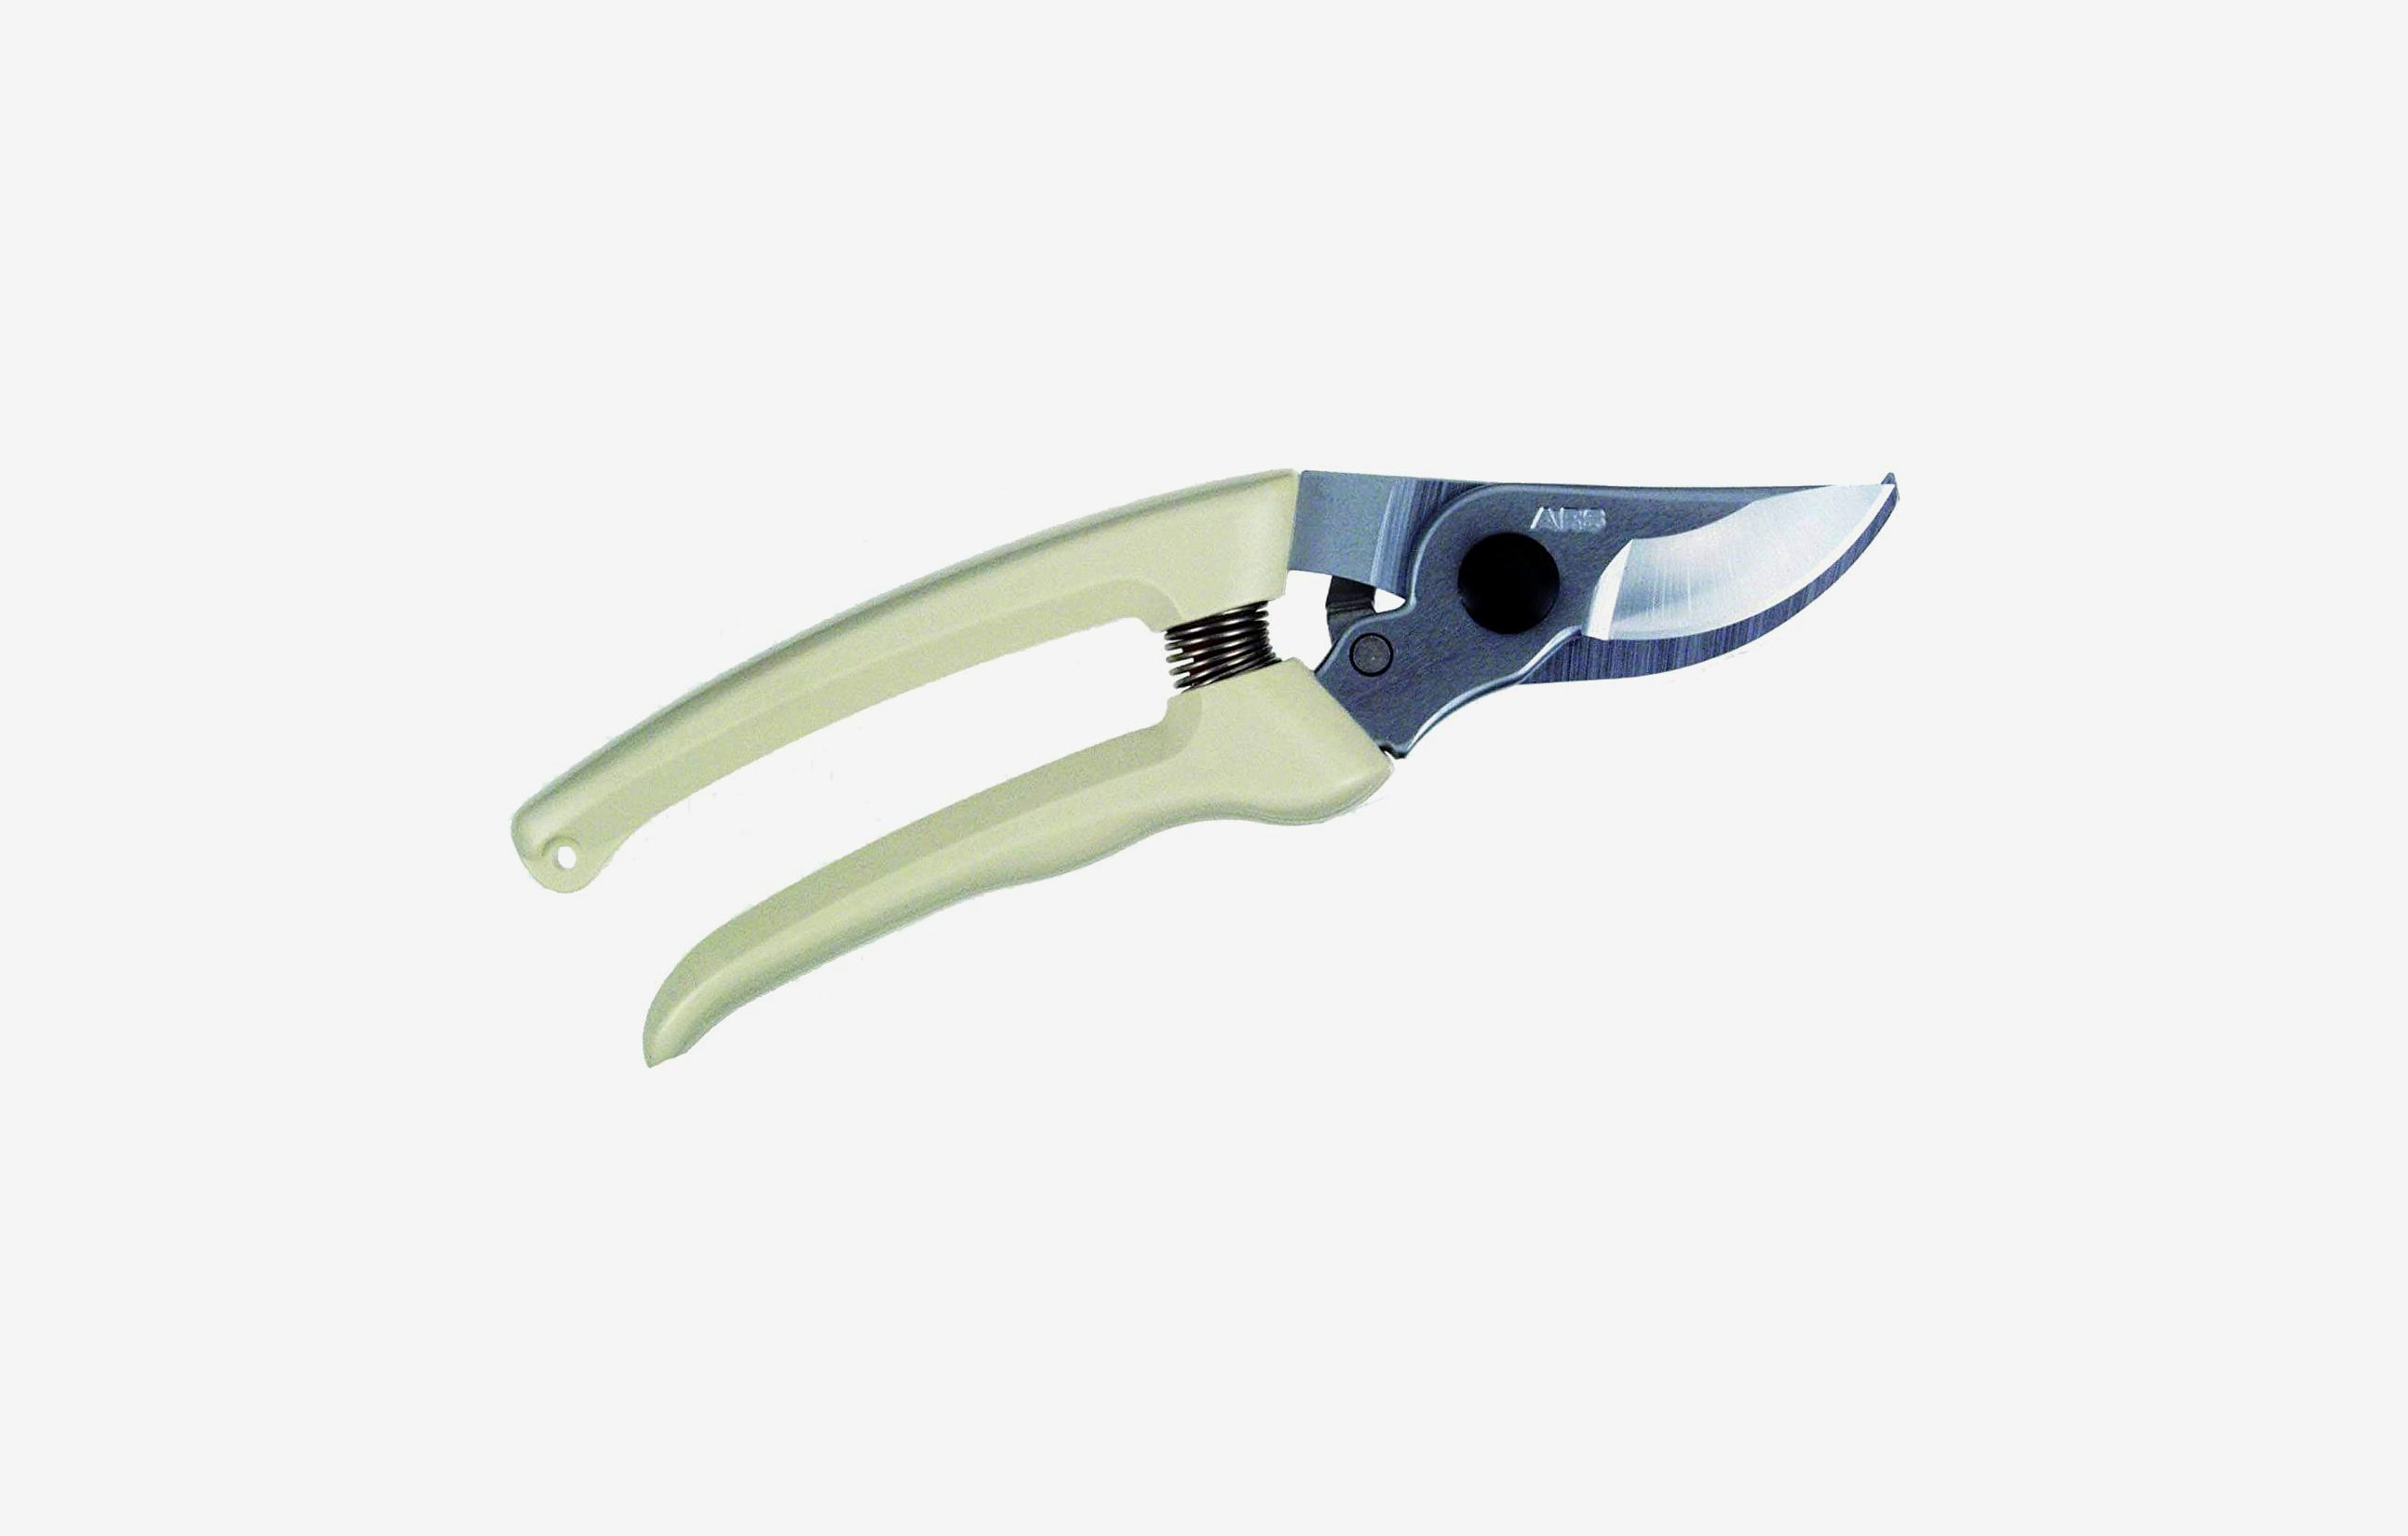 How To Choose The Best Pruning Shears